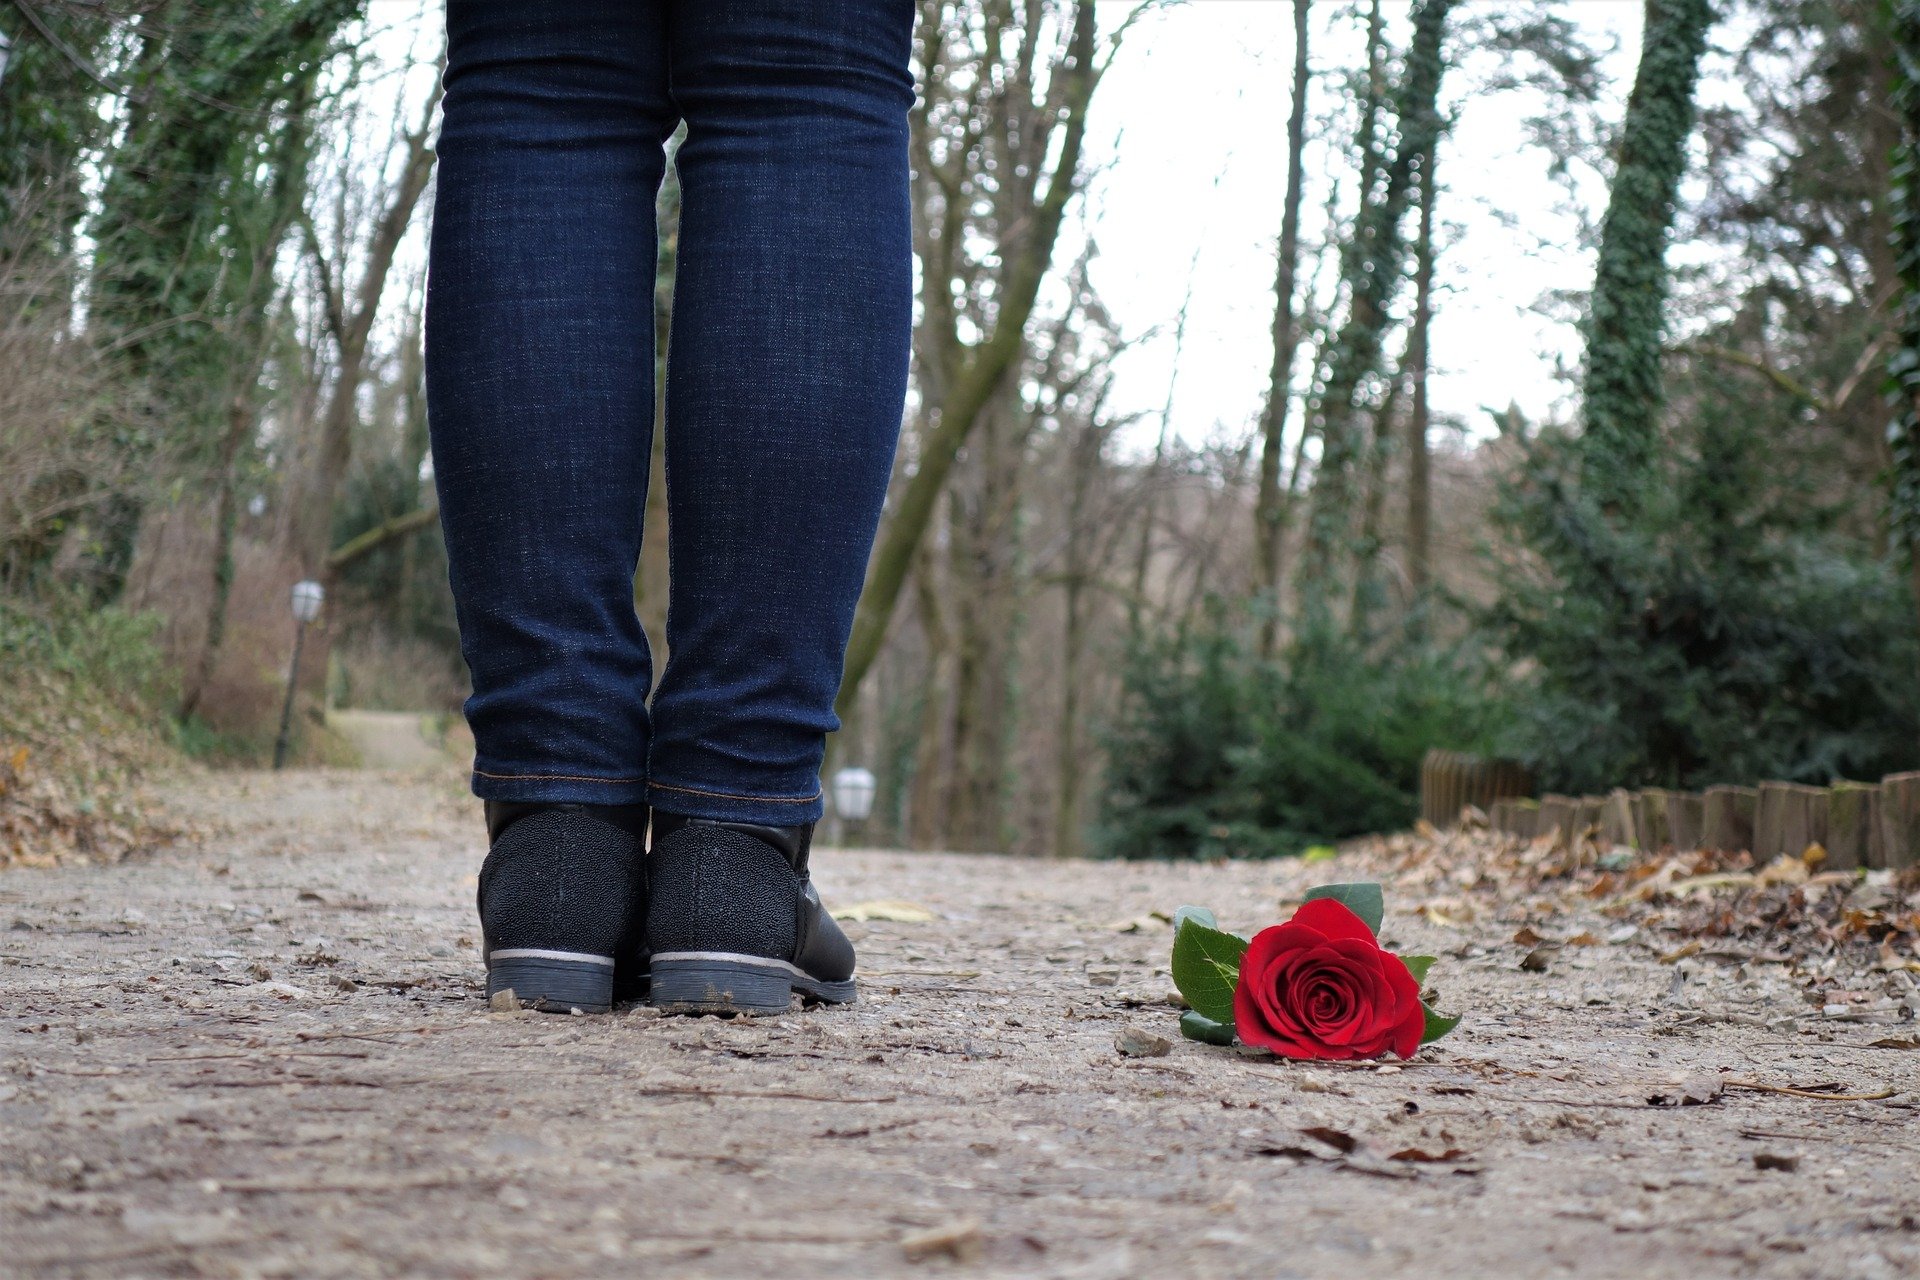 A rose laying on the ground next to a young girl. | Source: Pixabay.